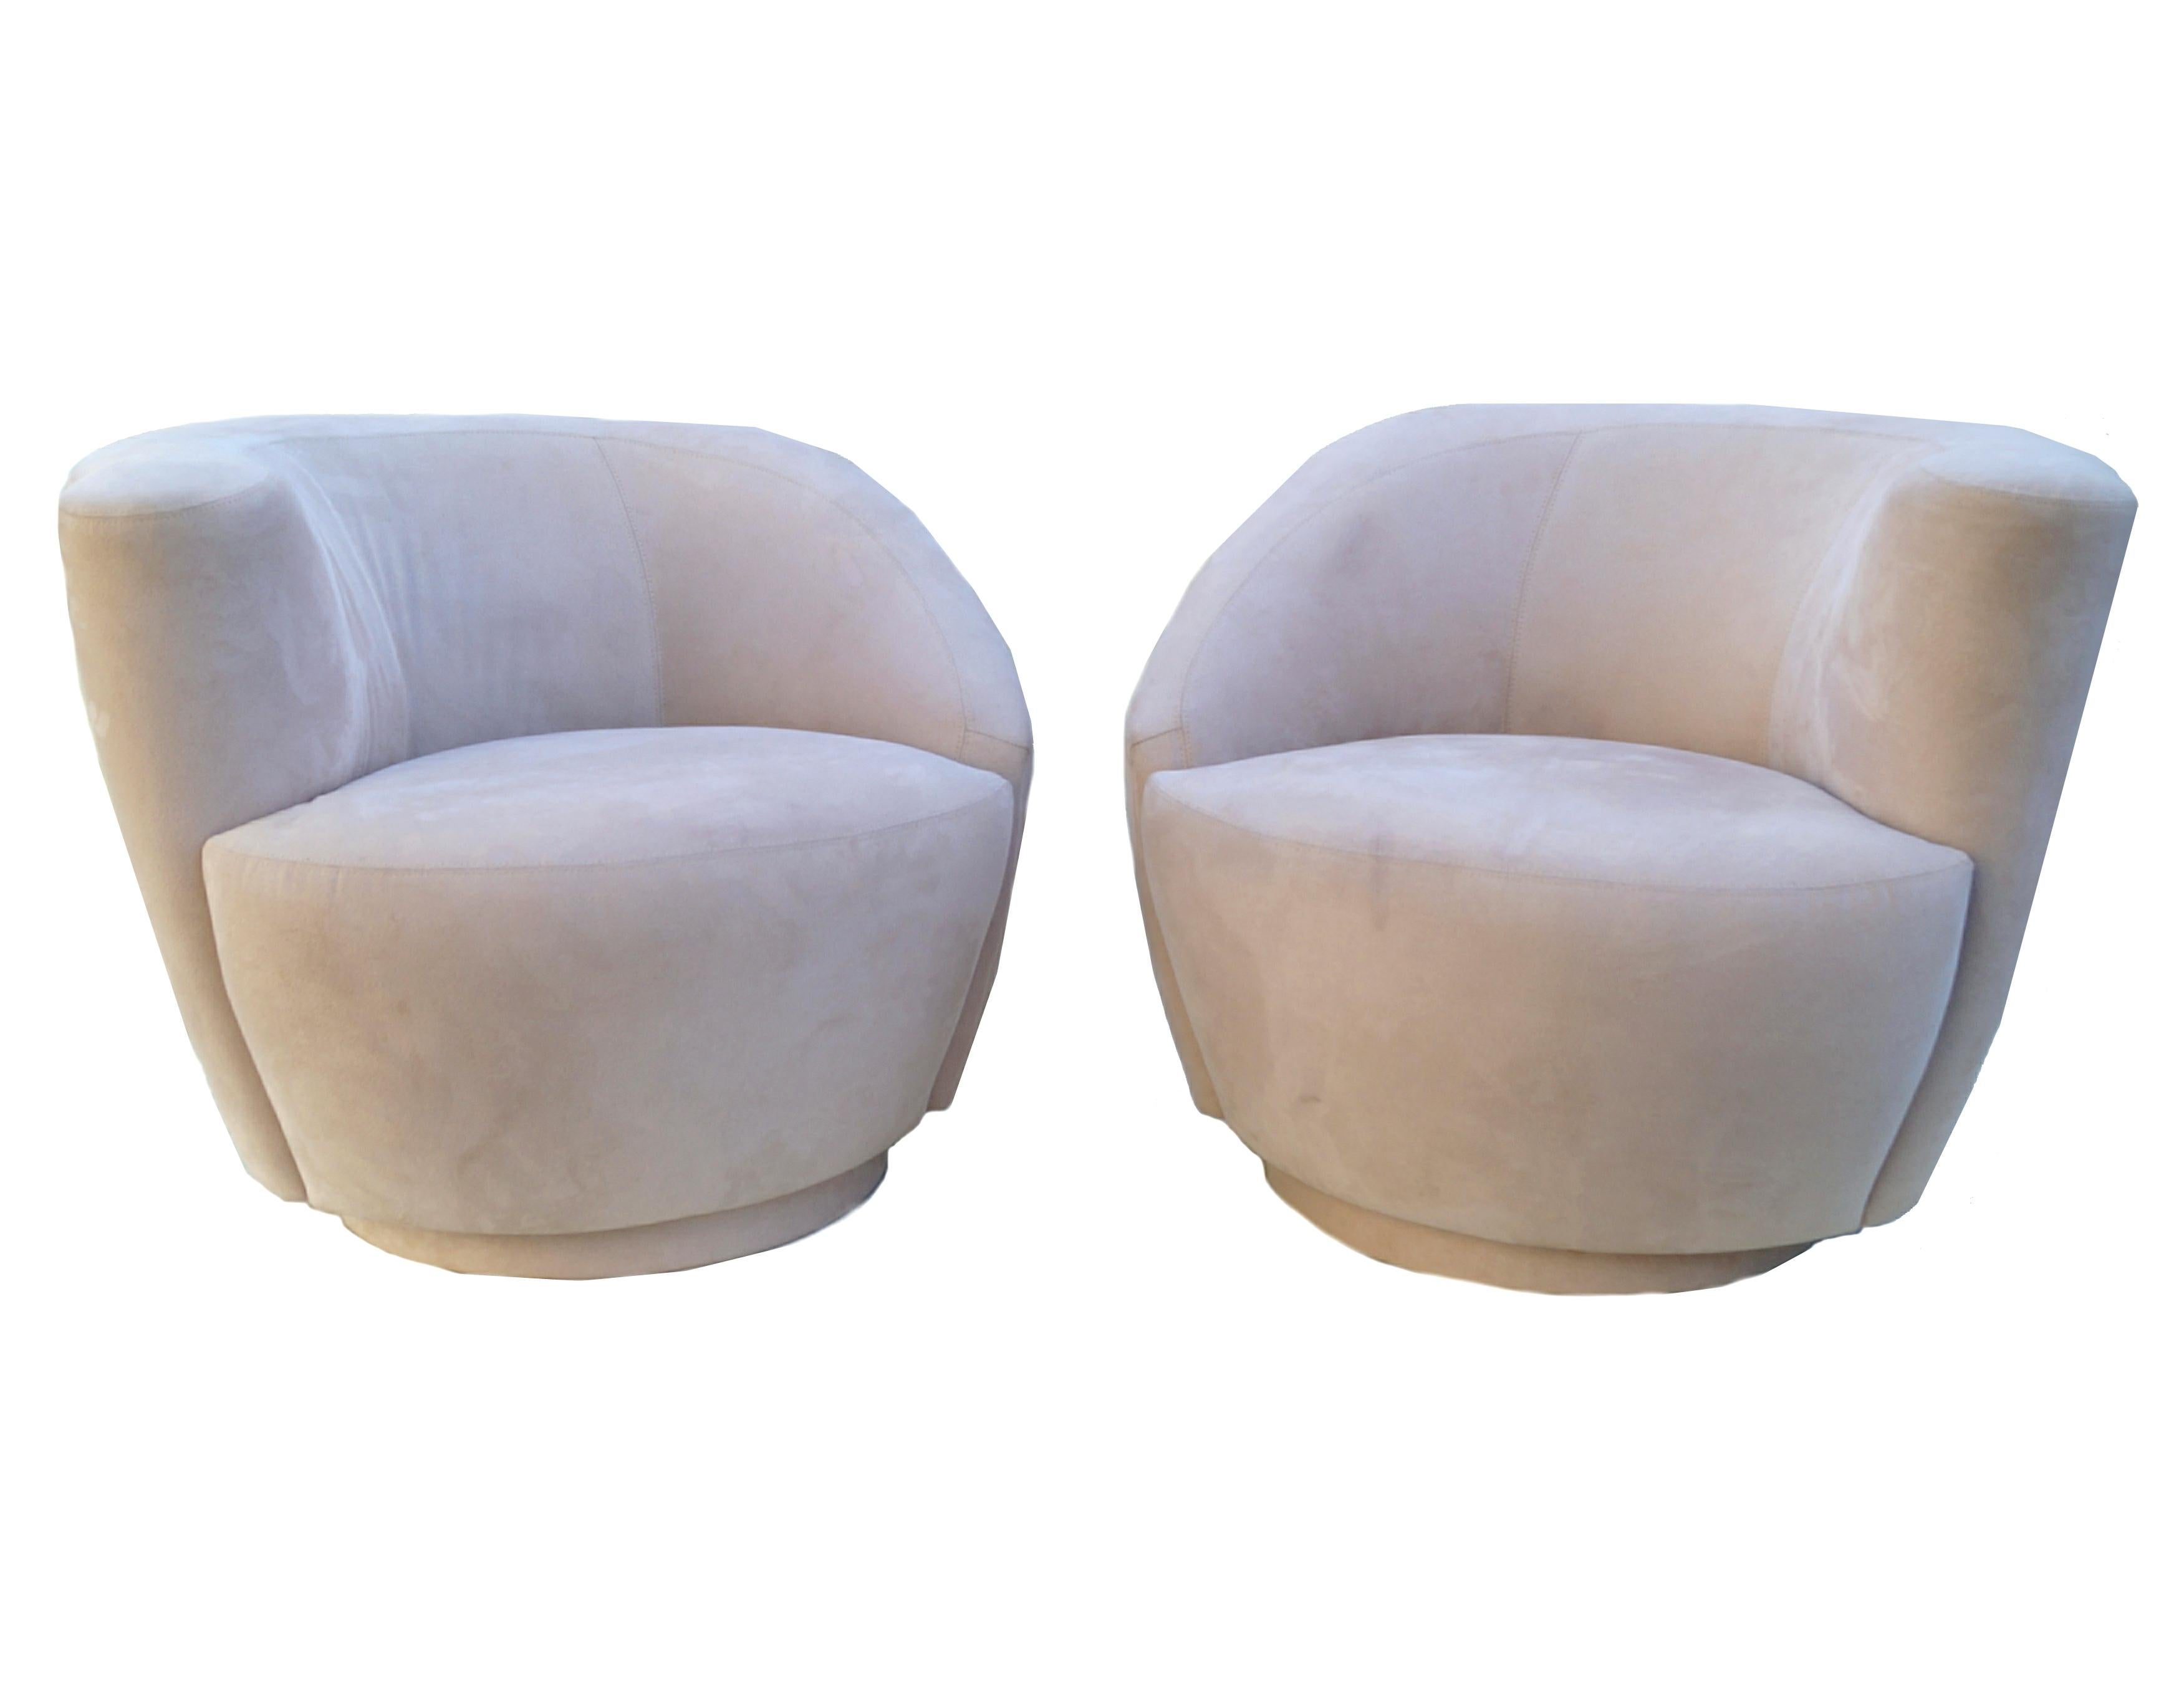 Pair of corkscrew swivel lounge chairs armchairs.